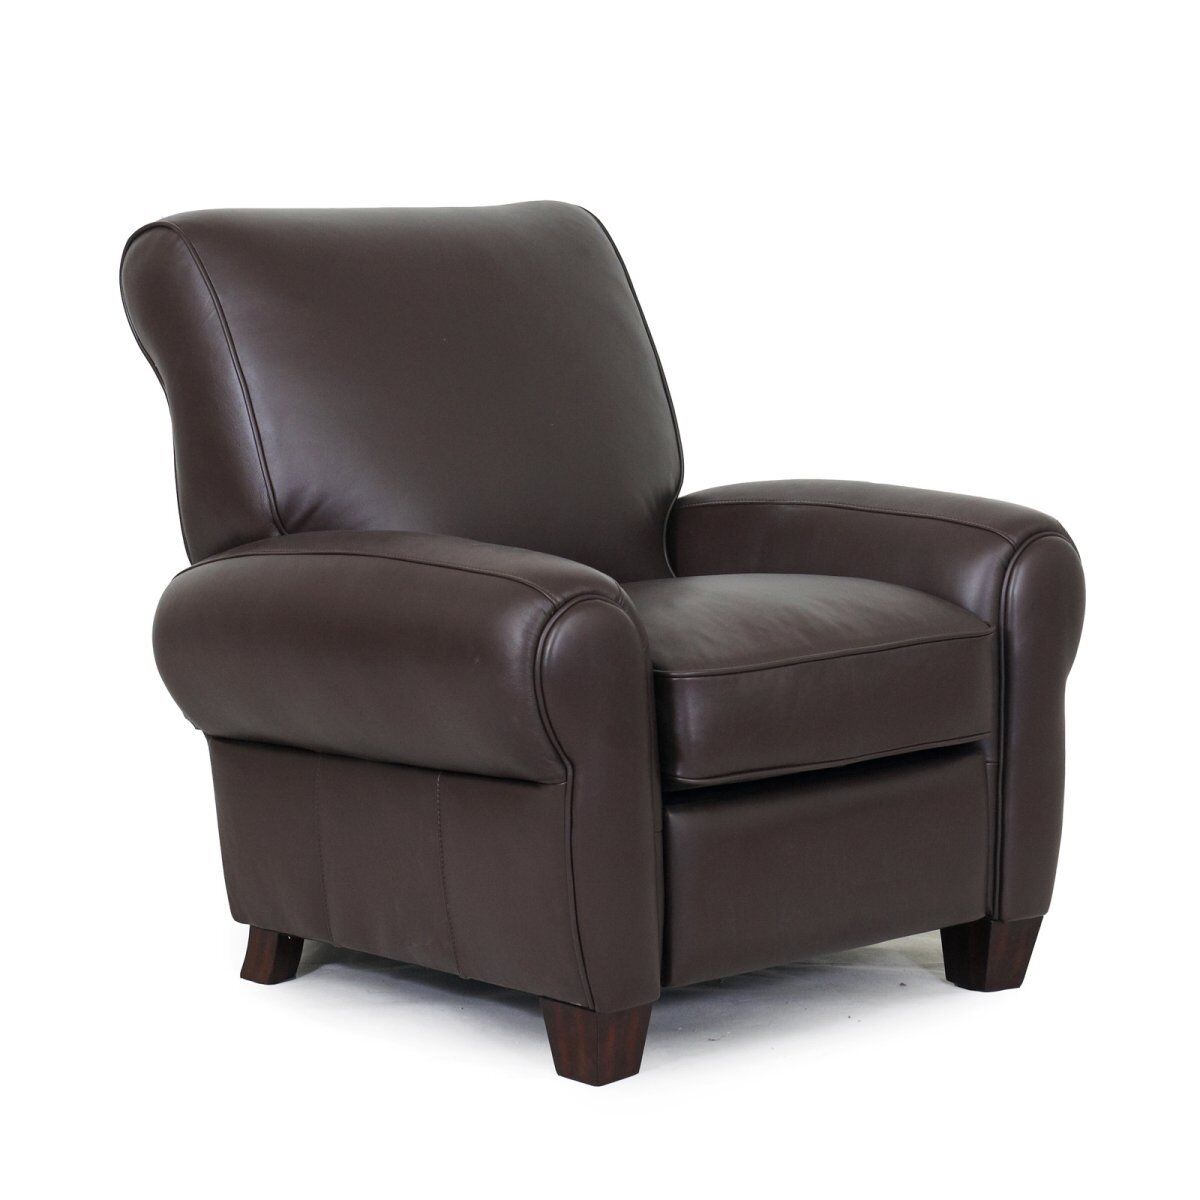 Barcalounger Lectern II Recliner Lounger Chair - Chocolate Top Grain Leather